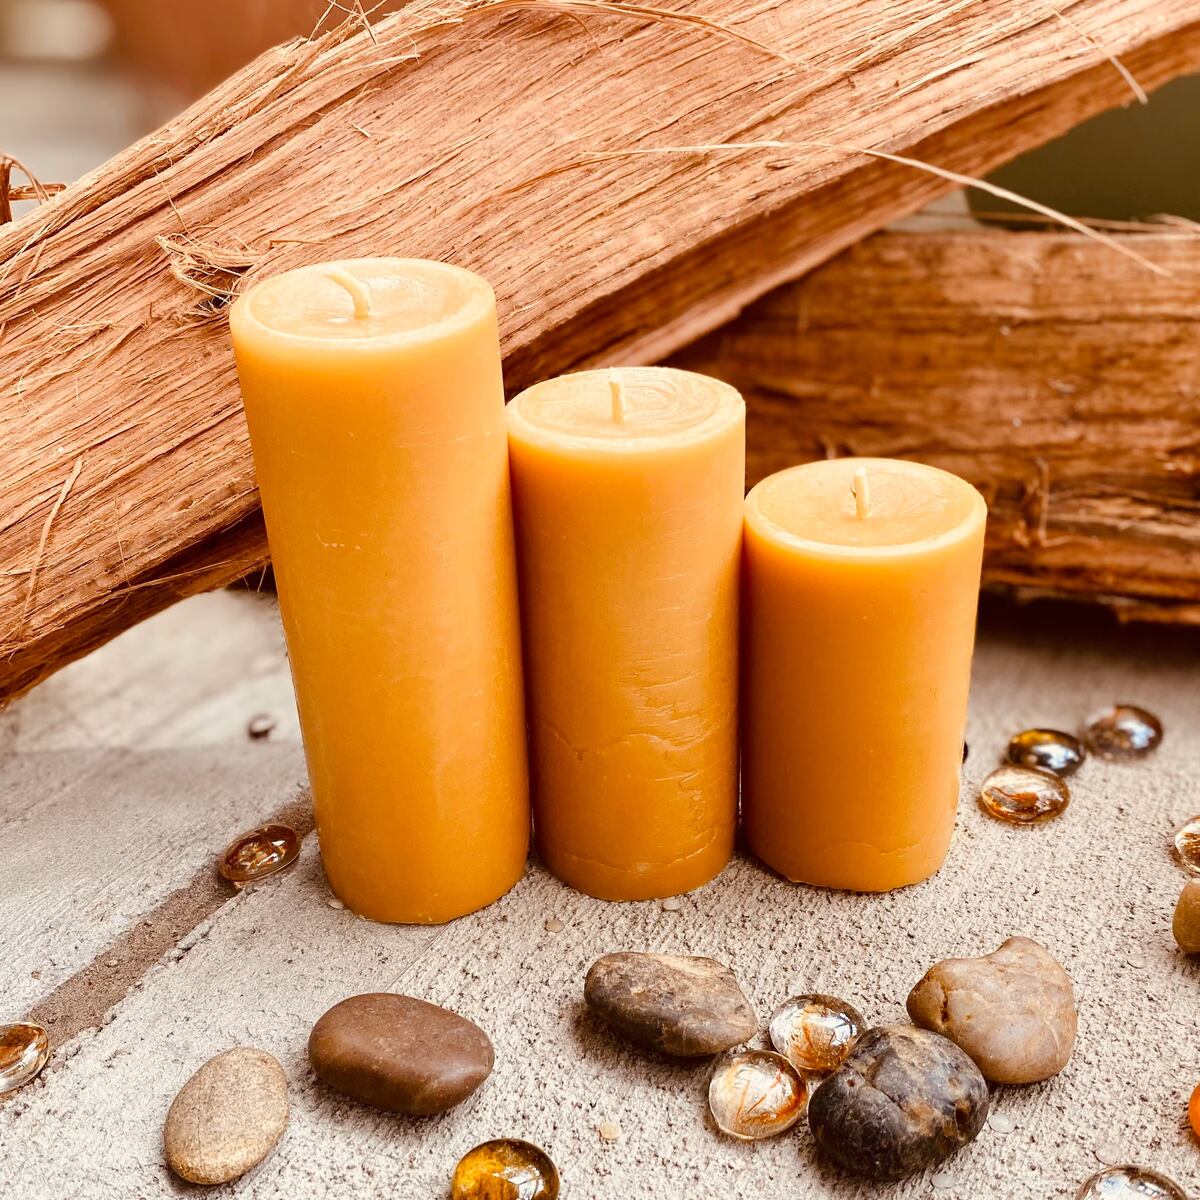 What Are Beeswax Candles Good For